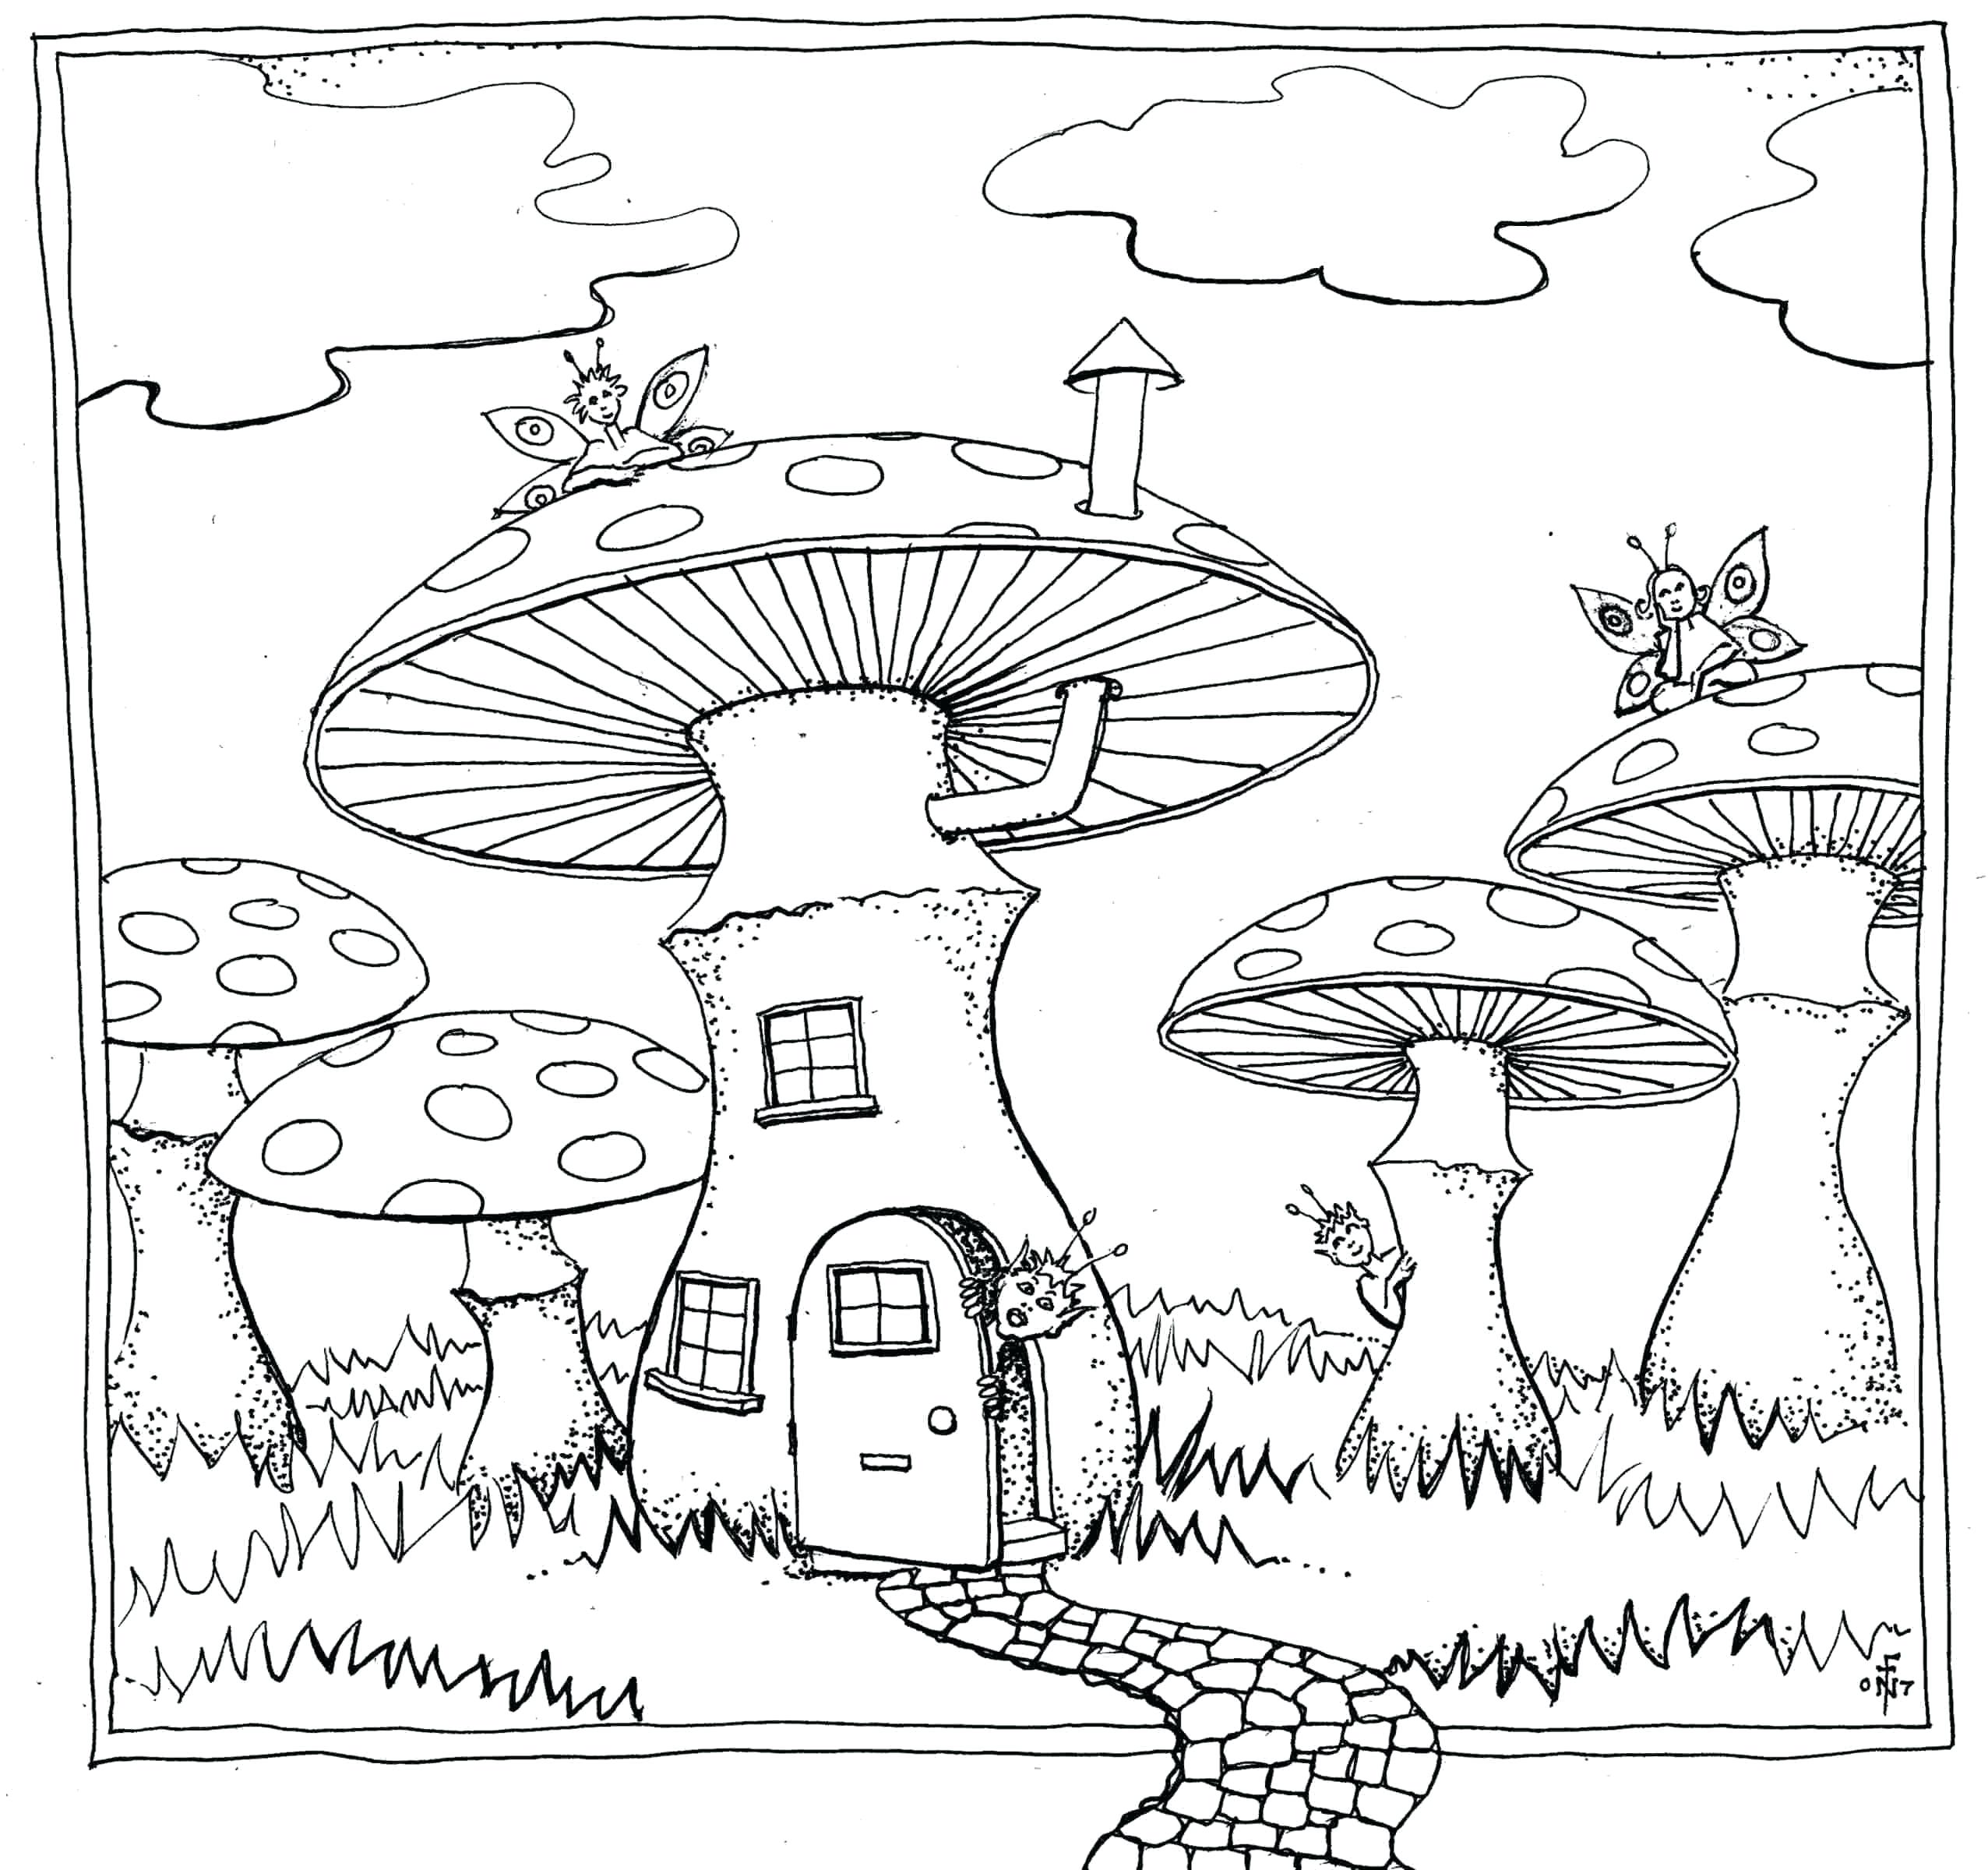 Mushrooms Coloring Pages   Coloring Home